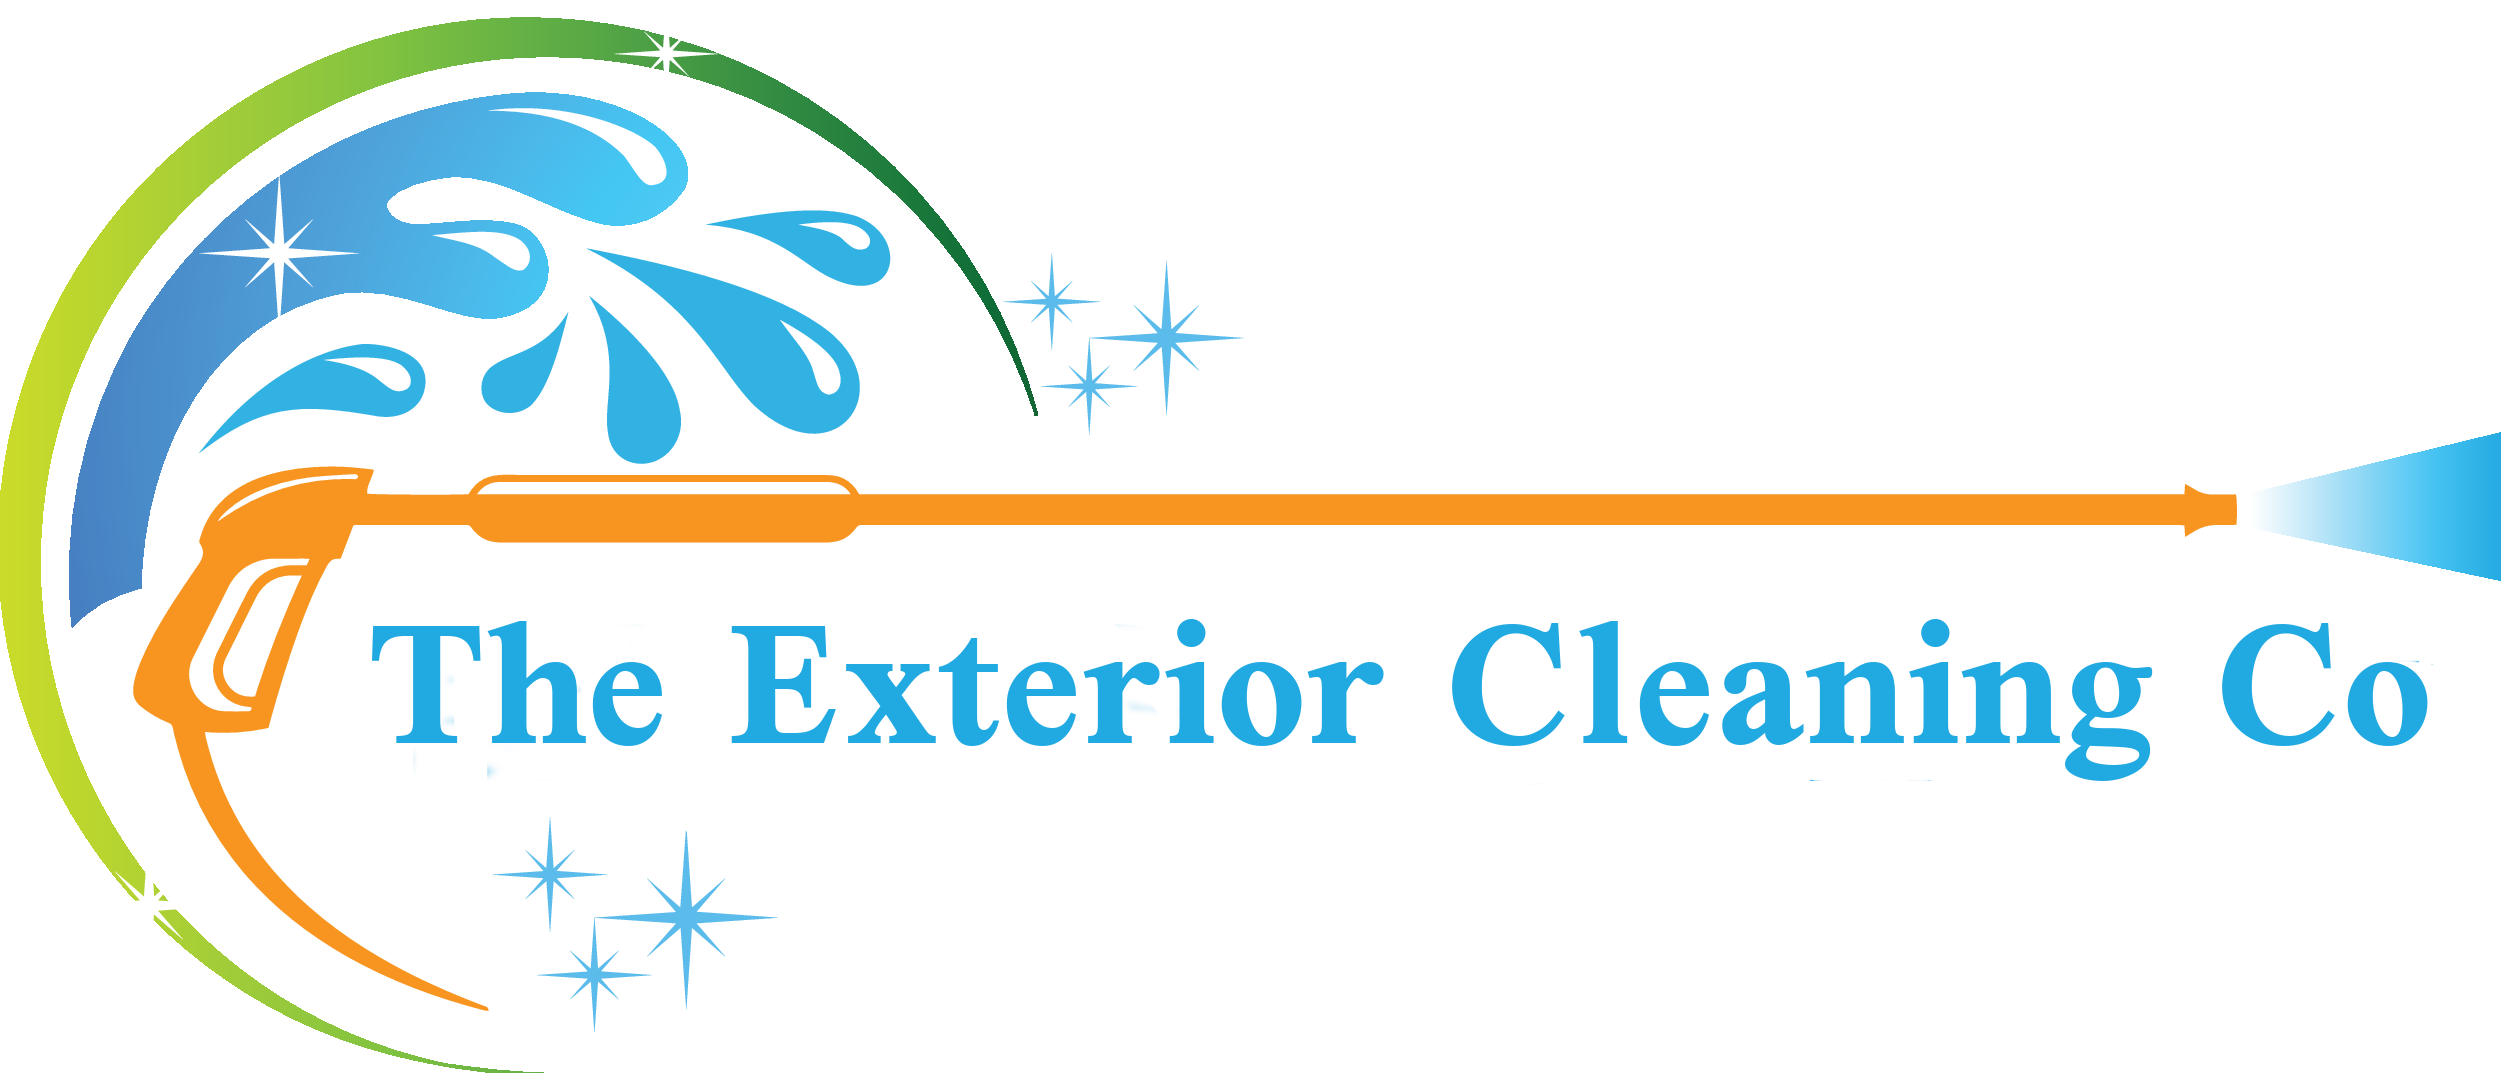 The Exterior Cleaning Co